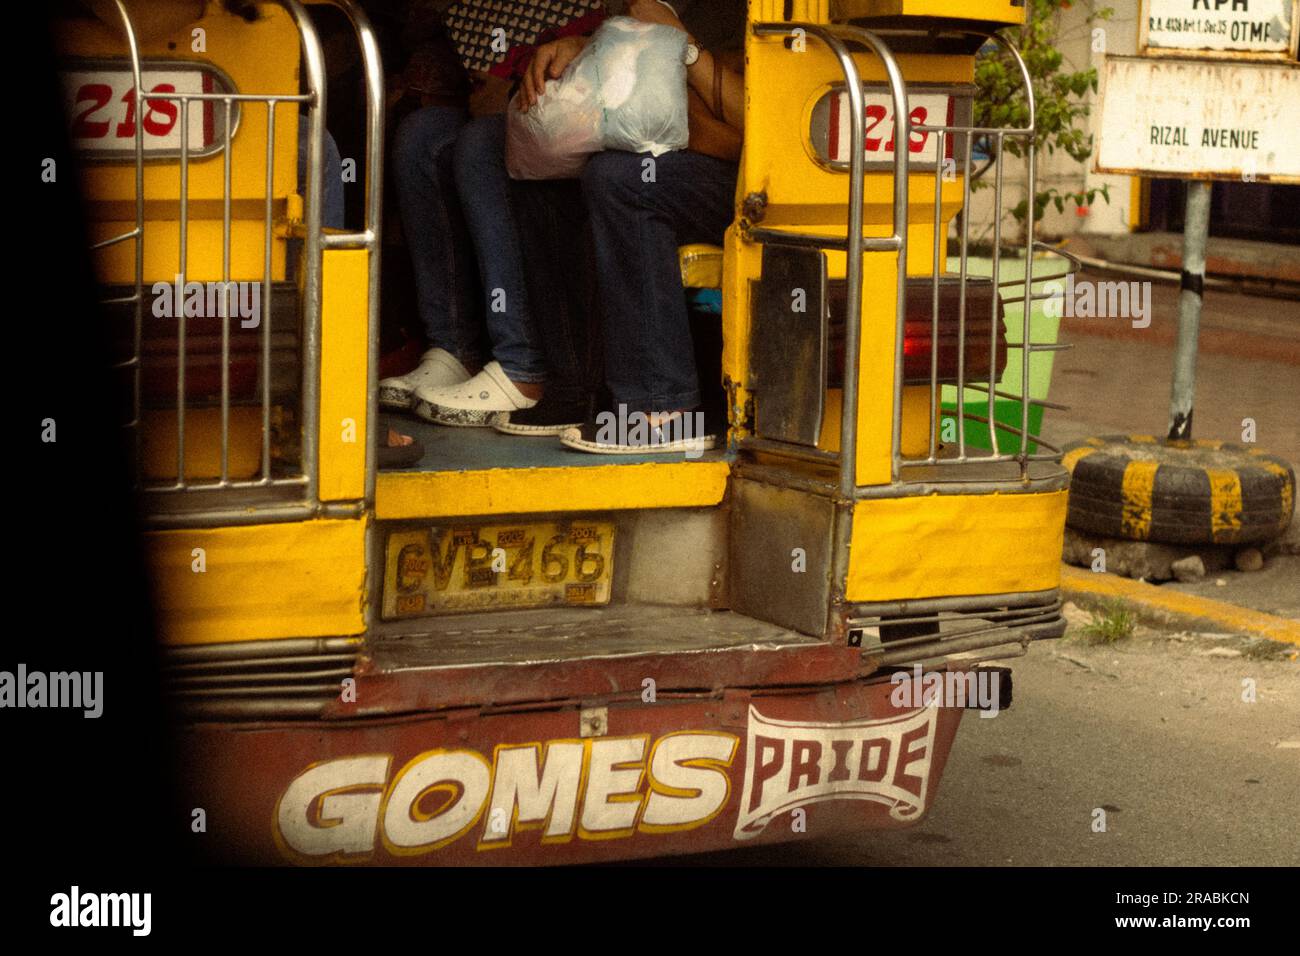 The back of a yellow jeepney in Olongapo, Zambales, Philippines Stock Photo